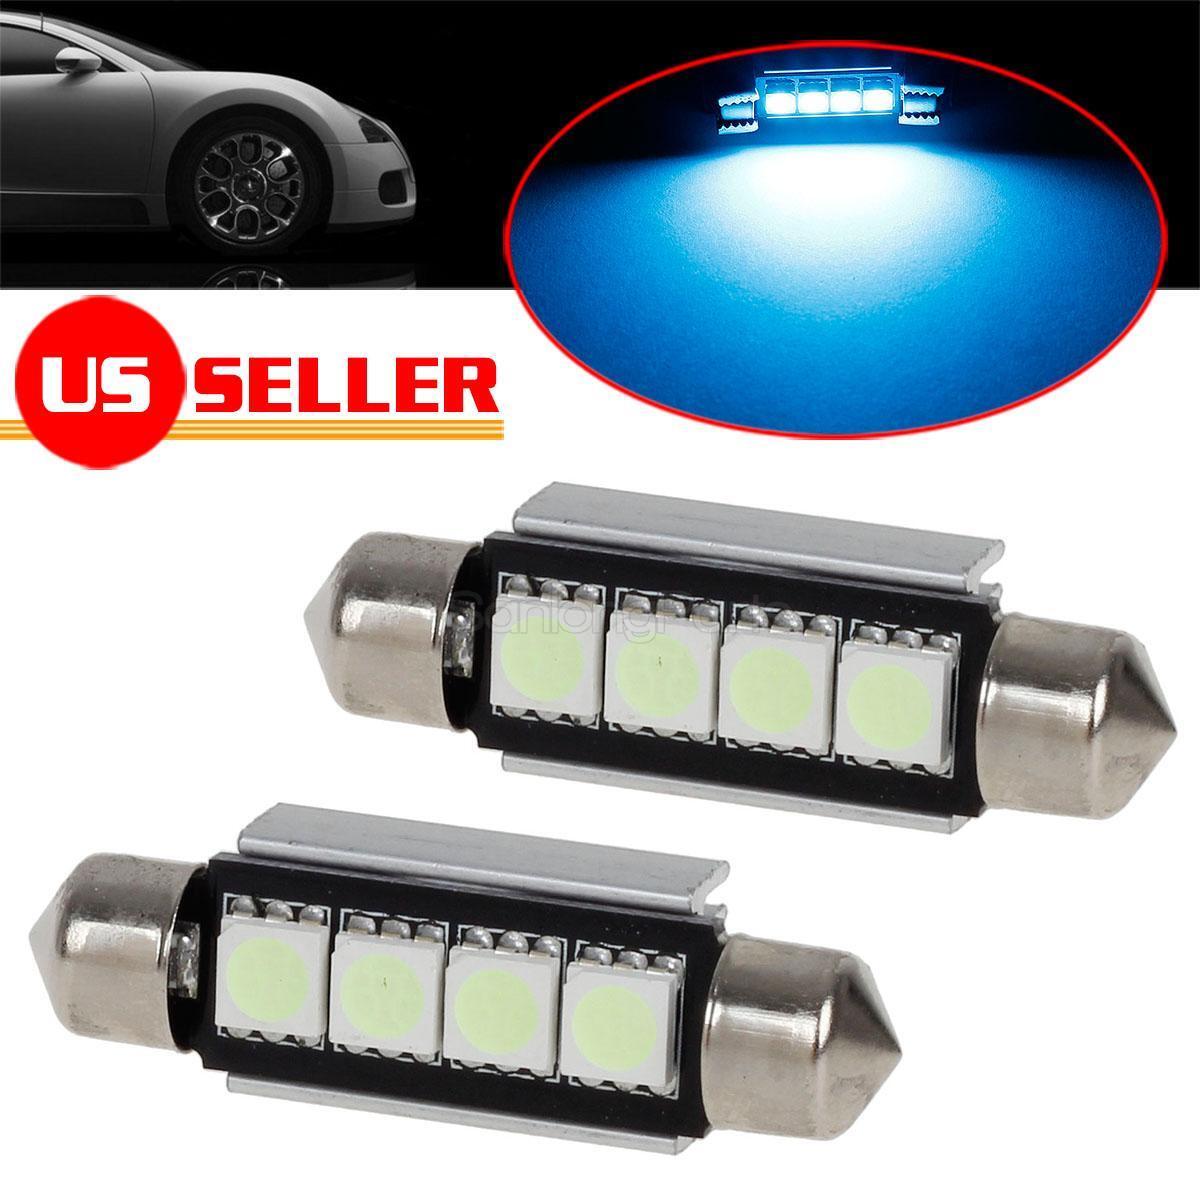 2x Ice Blue 561 562 LED Bulbs for Car Interior Dome Map Lights Lamps Accessories